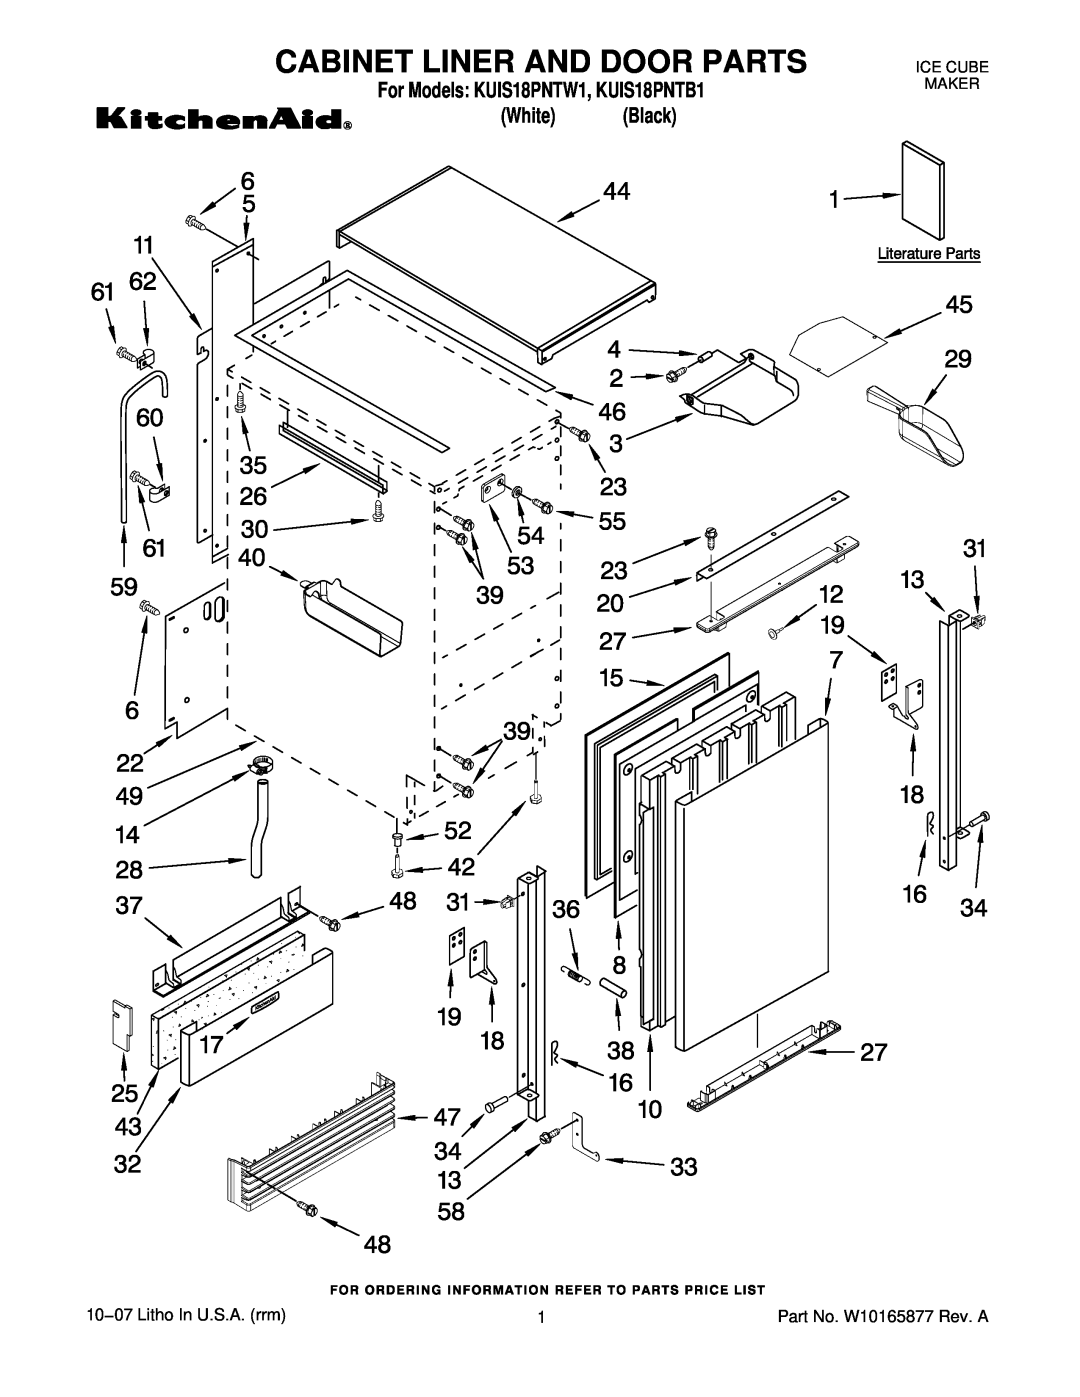 KitchenAid manual Cabinet Liner And Door Parts, For Models KUIS18PNTW1, KUIS18PNTB1 White Black, Ice Cube Maker 